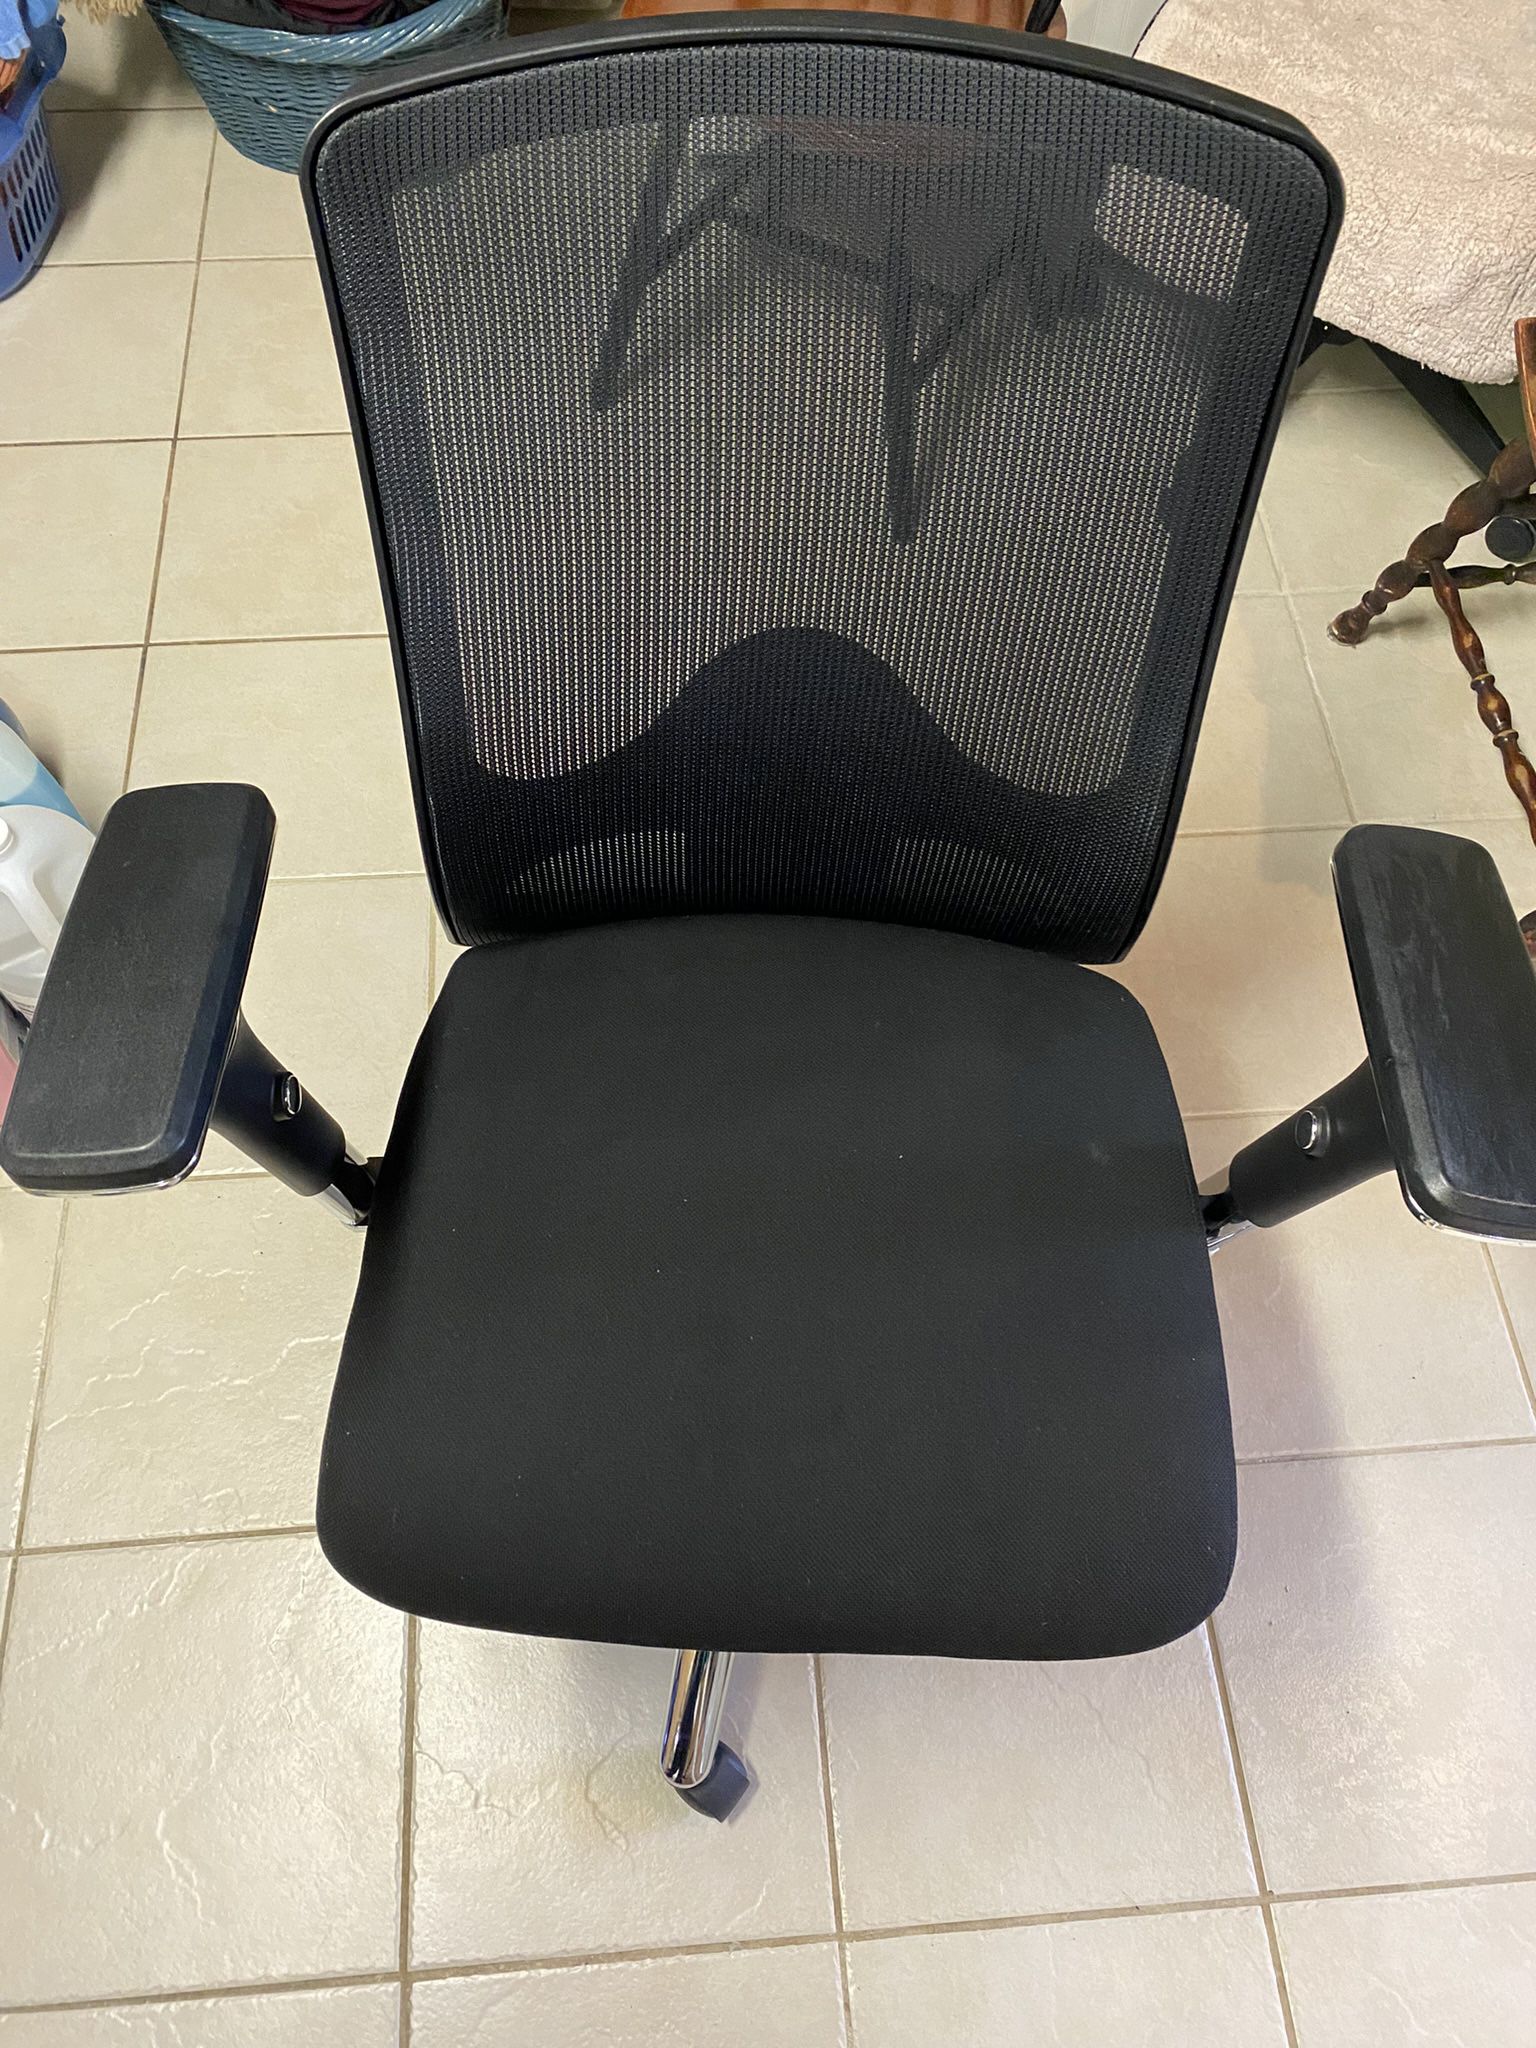 Extra wide, heavy duty office chair